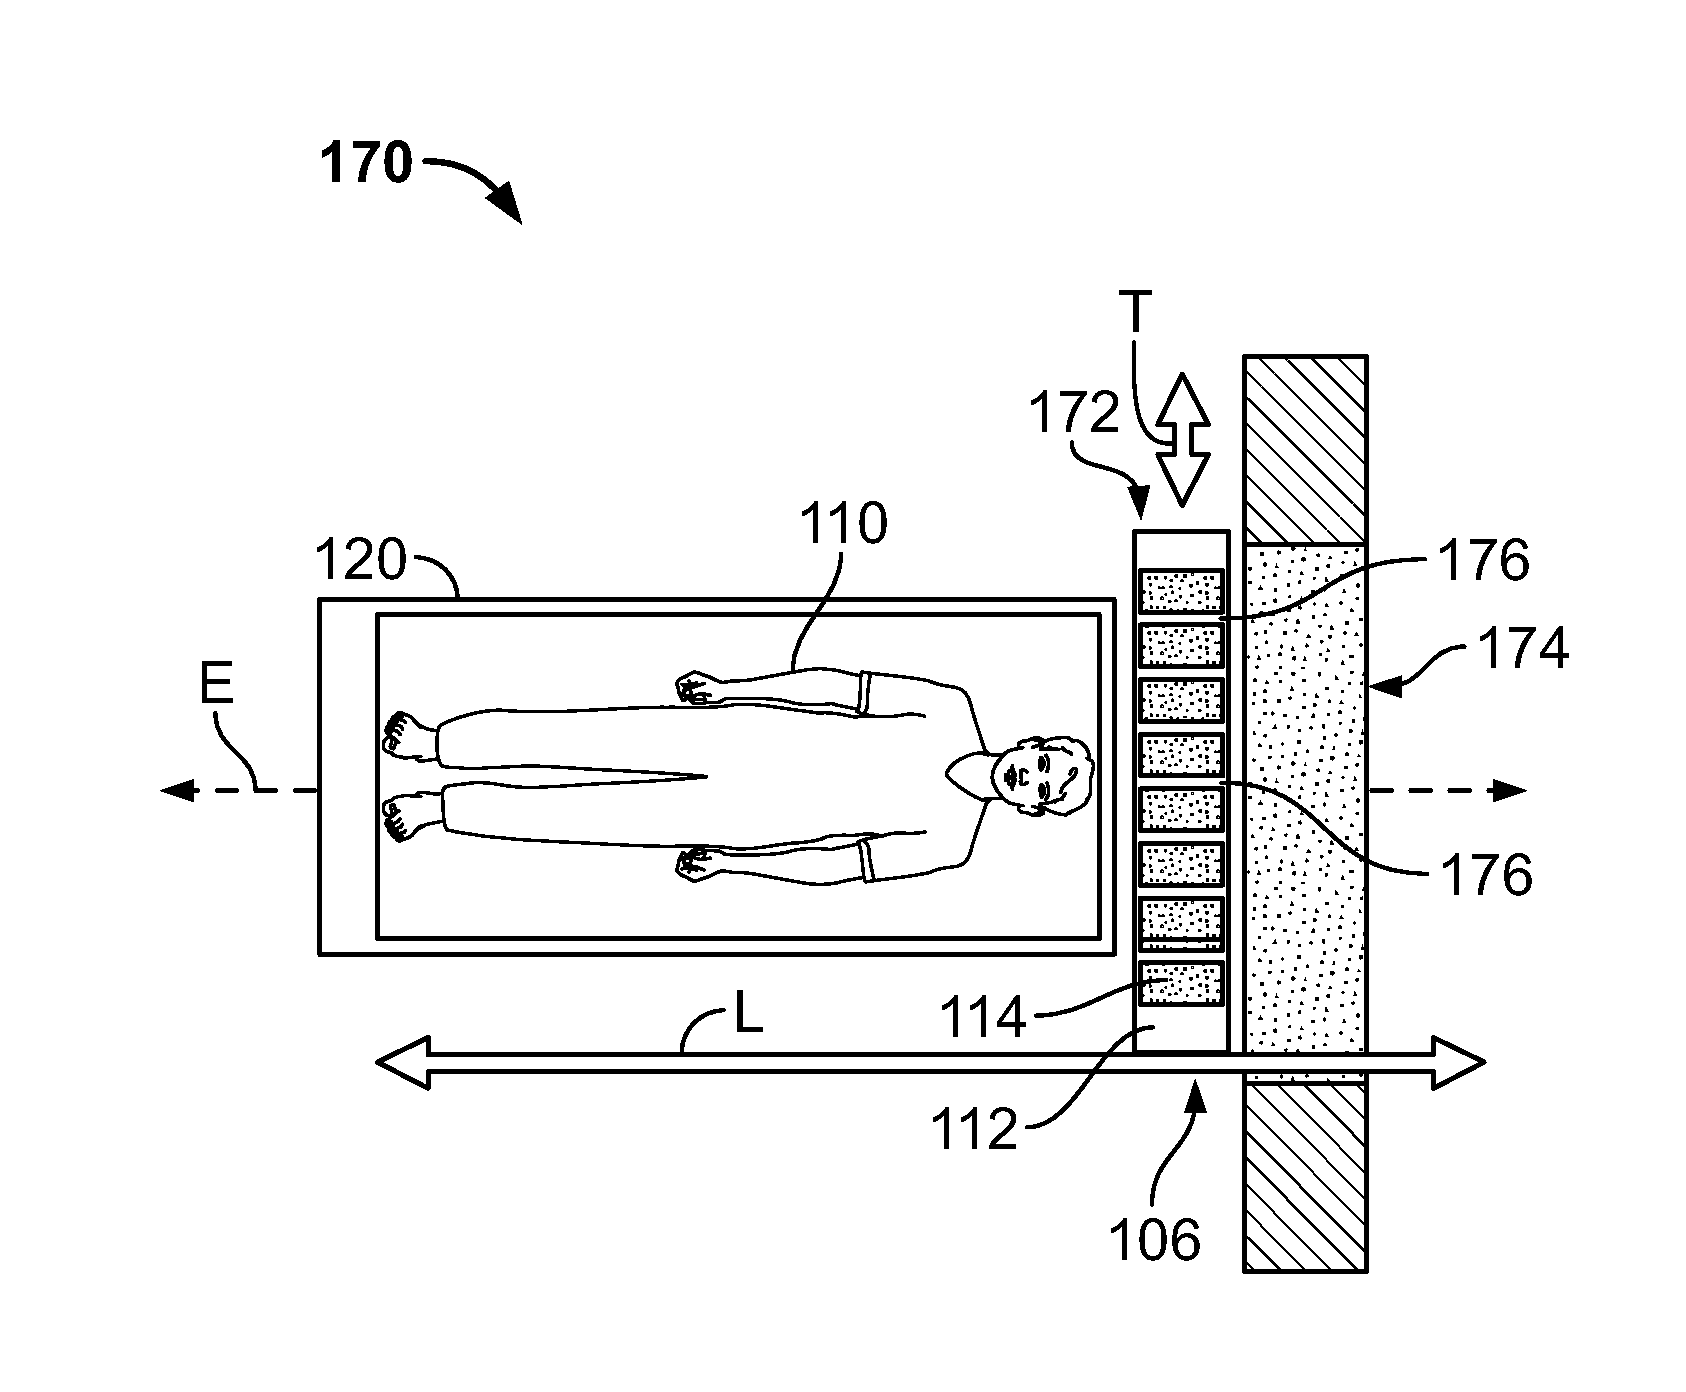 Systems and methods for planar imaging with detectors having moving detector heads